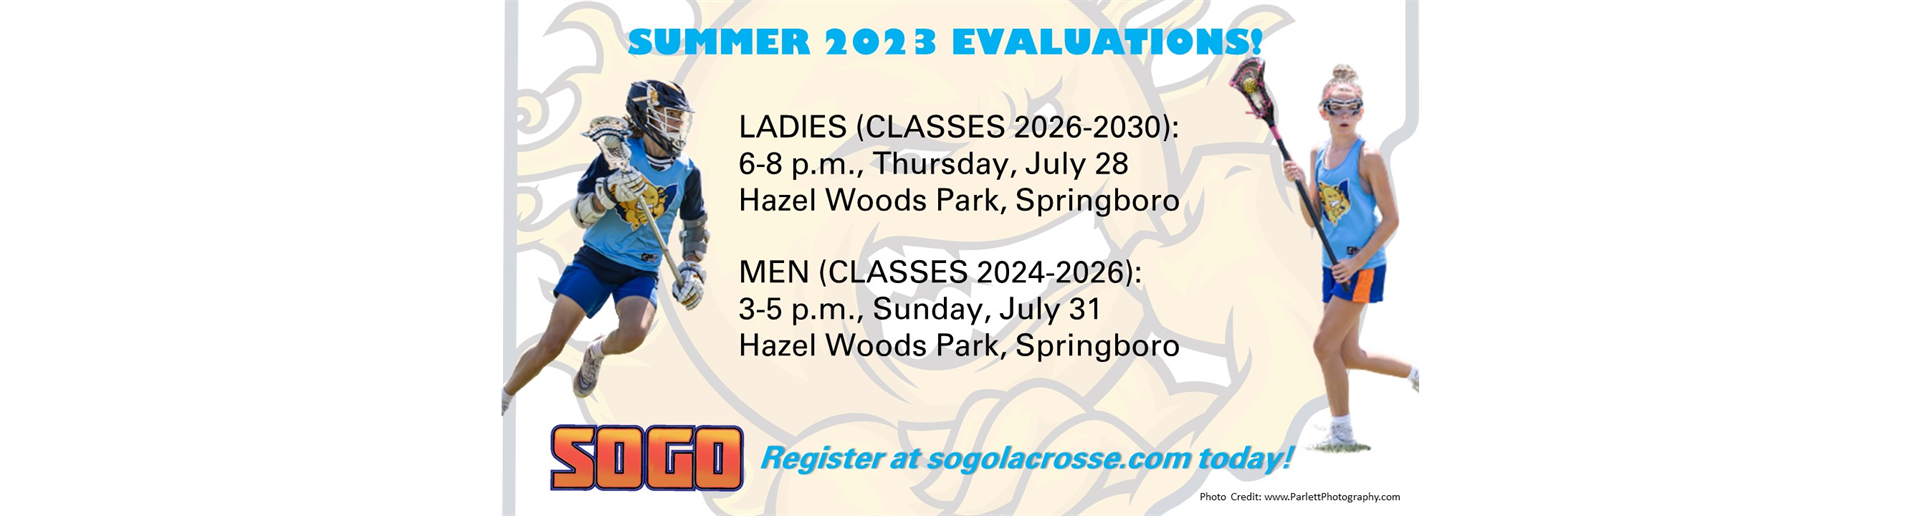 SOGO Summer 2023 Evaluations Announced!